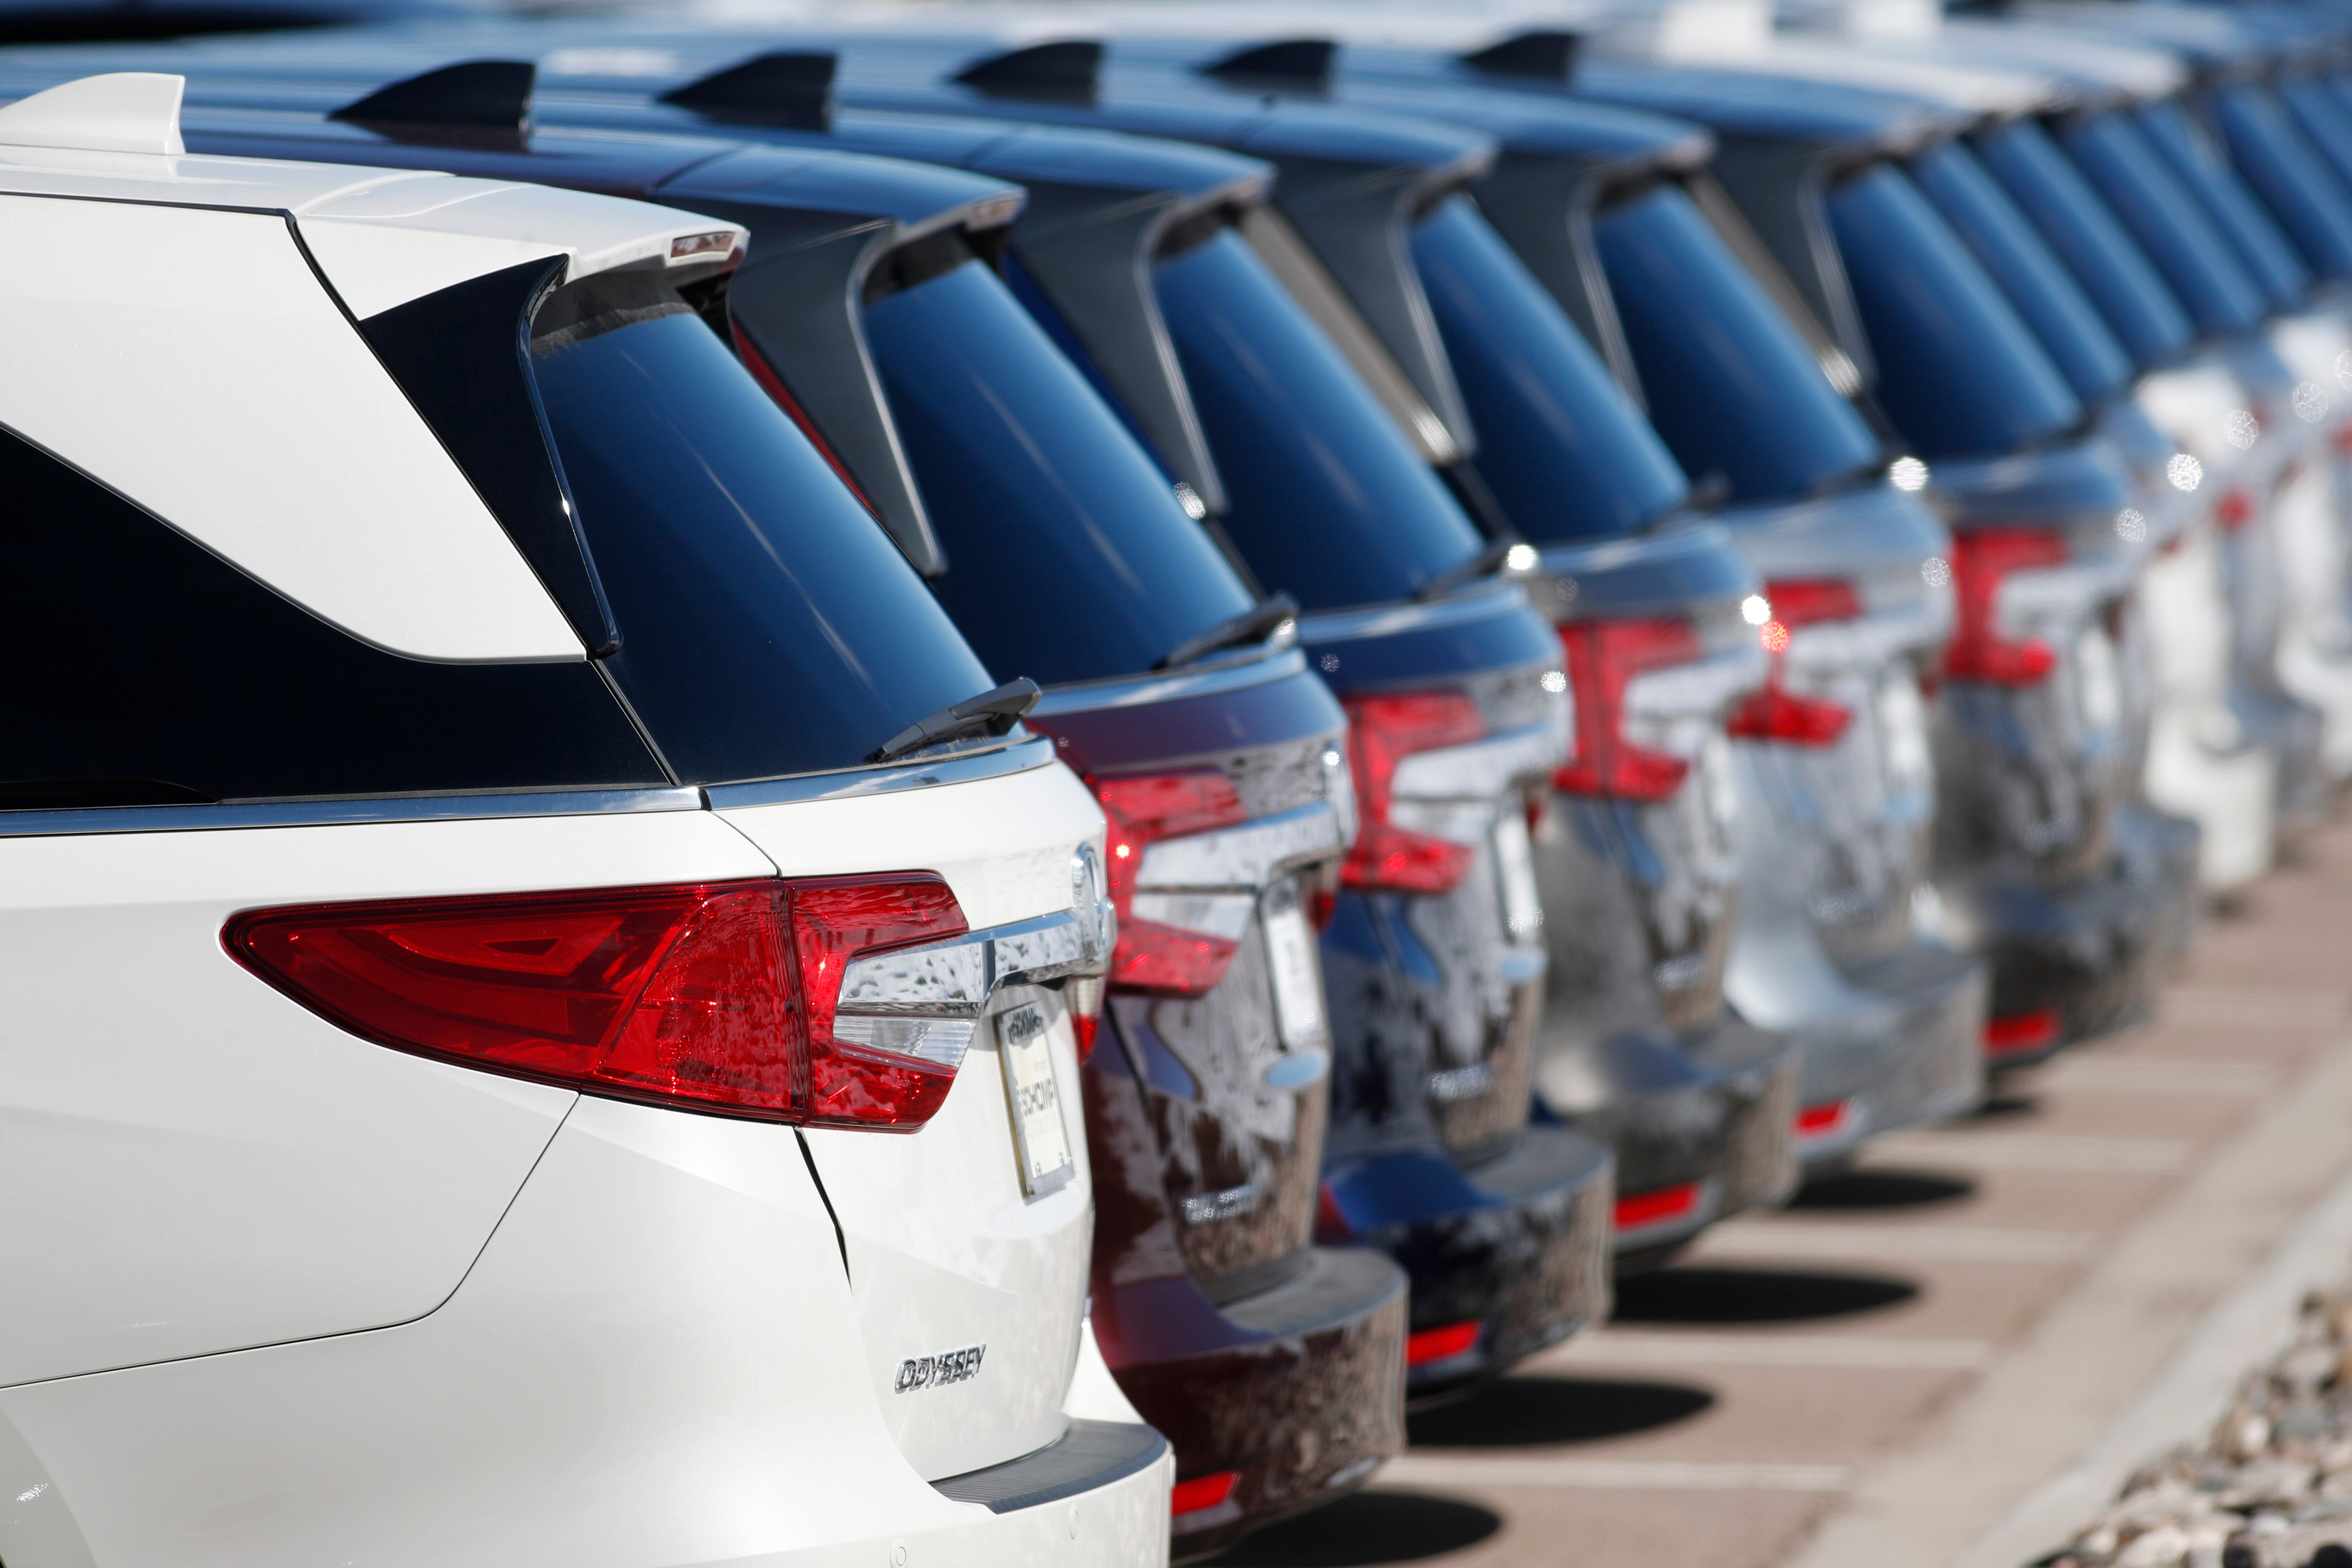 Michigan auto dealerships will be allowed to make online sales during the COVID-19 pandemic. The state had been one of only four that banned all sales of new vehicles.